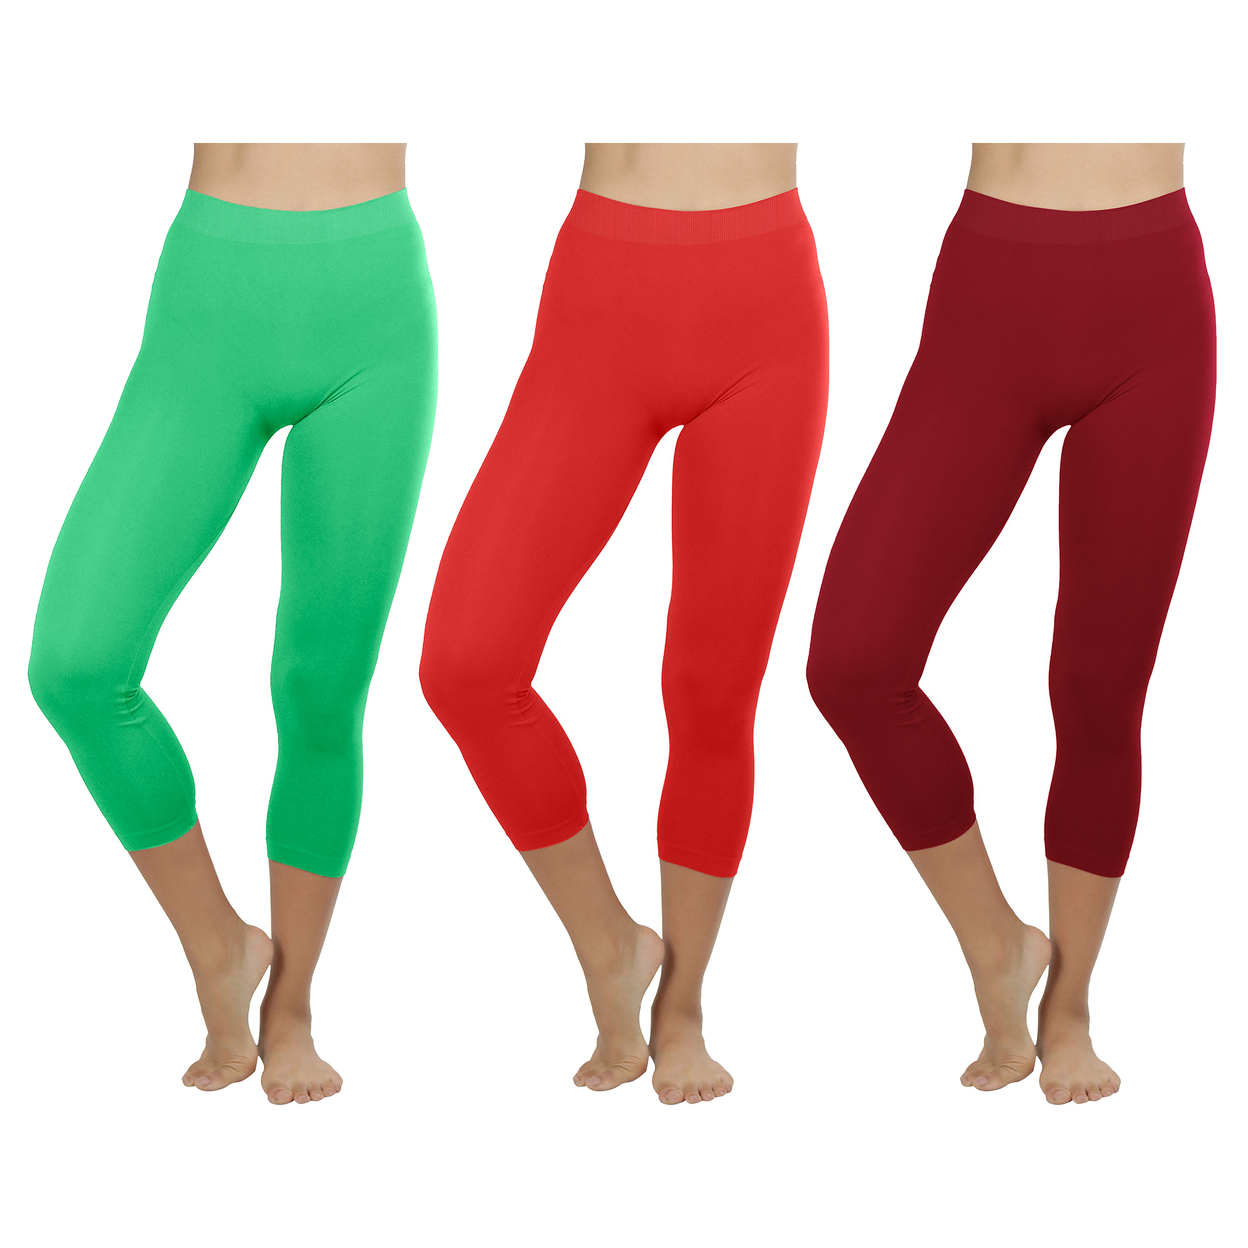 3-Pack: Women's Ultra-Soft High Waisted Smooth Stretch Active Yoga Capri Leggings - Green,green,green, X-large